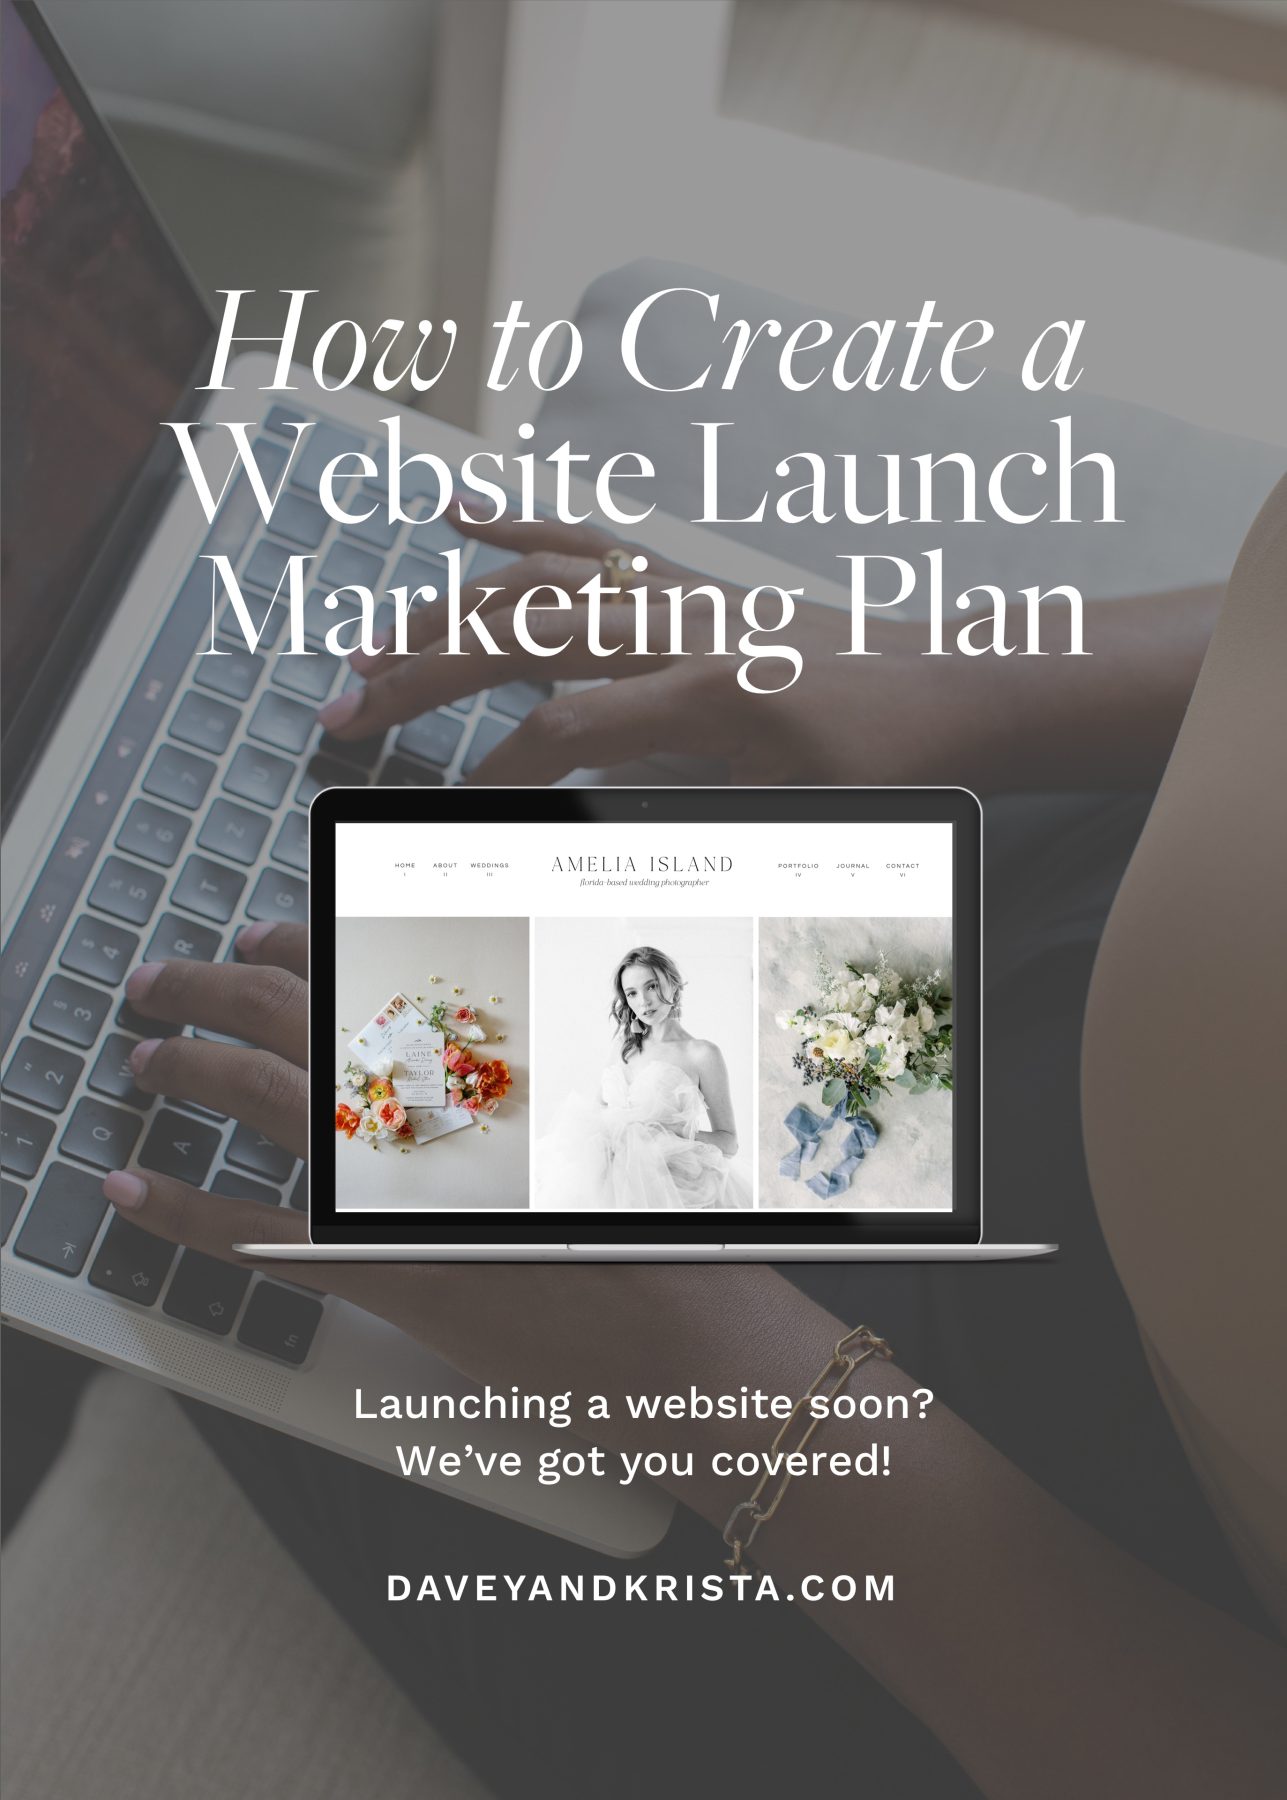 How to Create a Website Launch Marketing Plan 